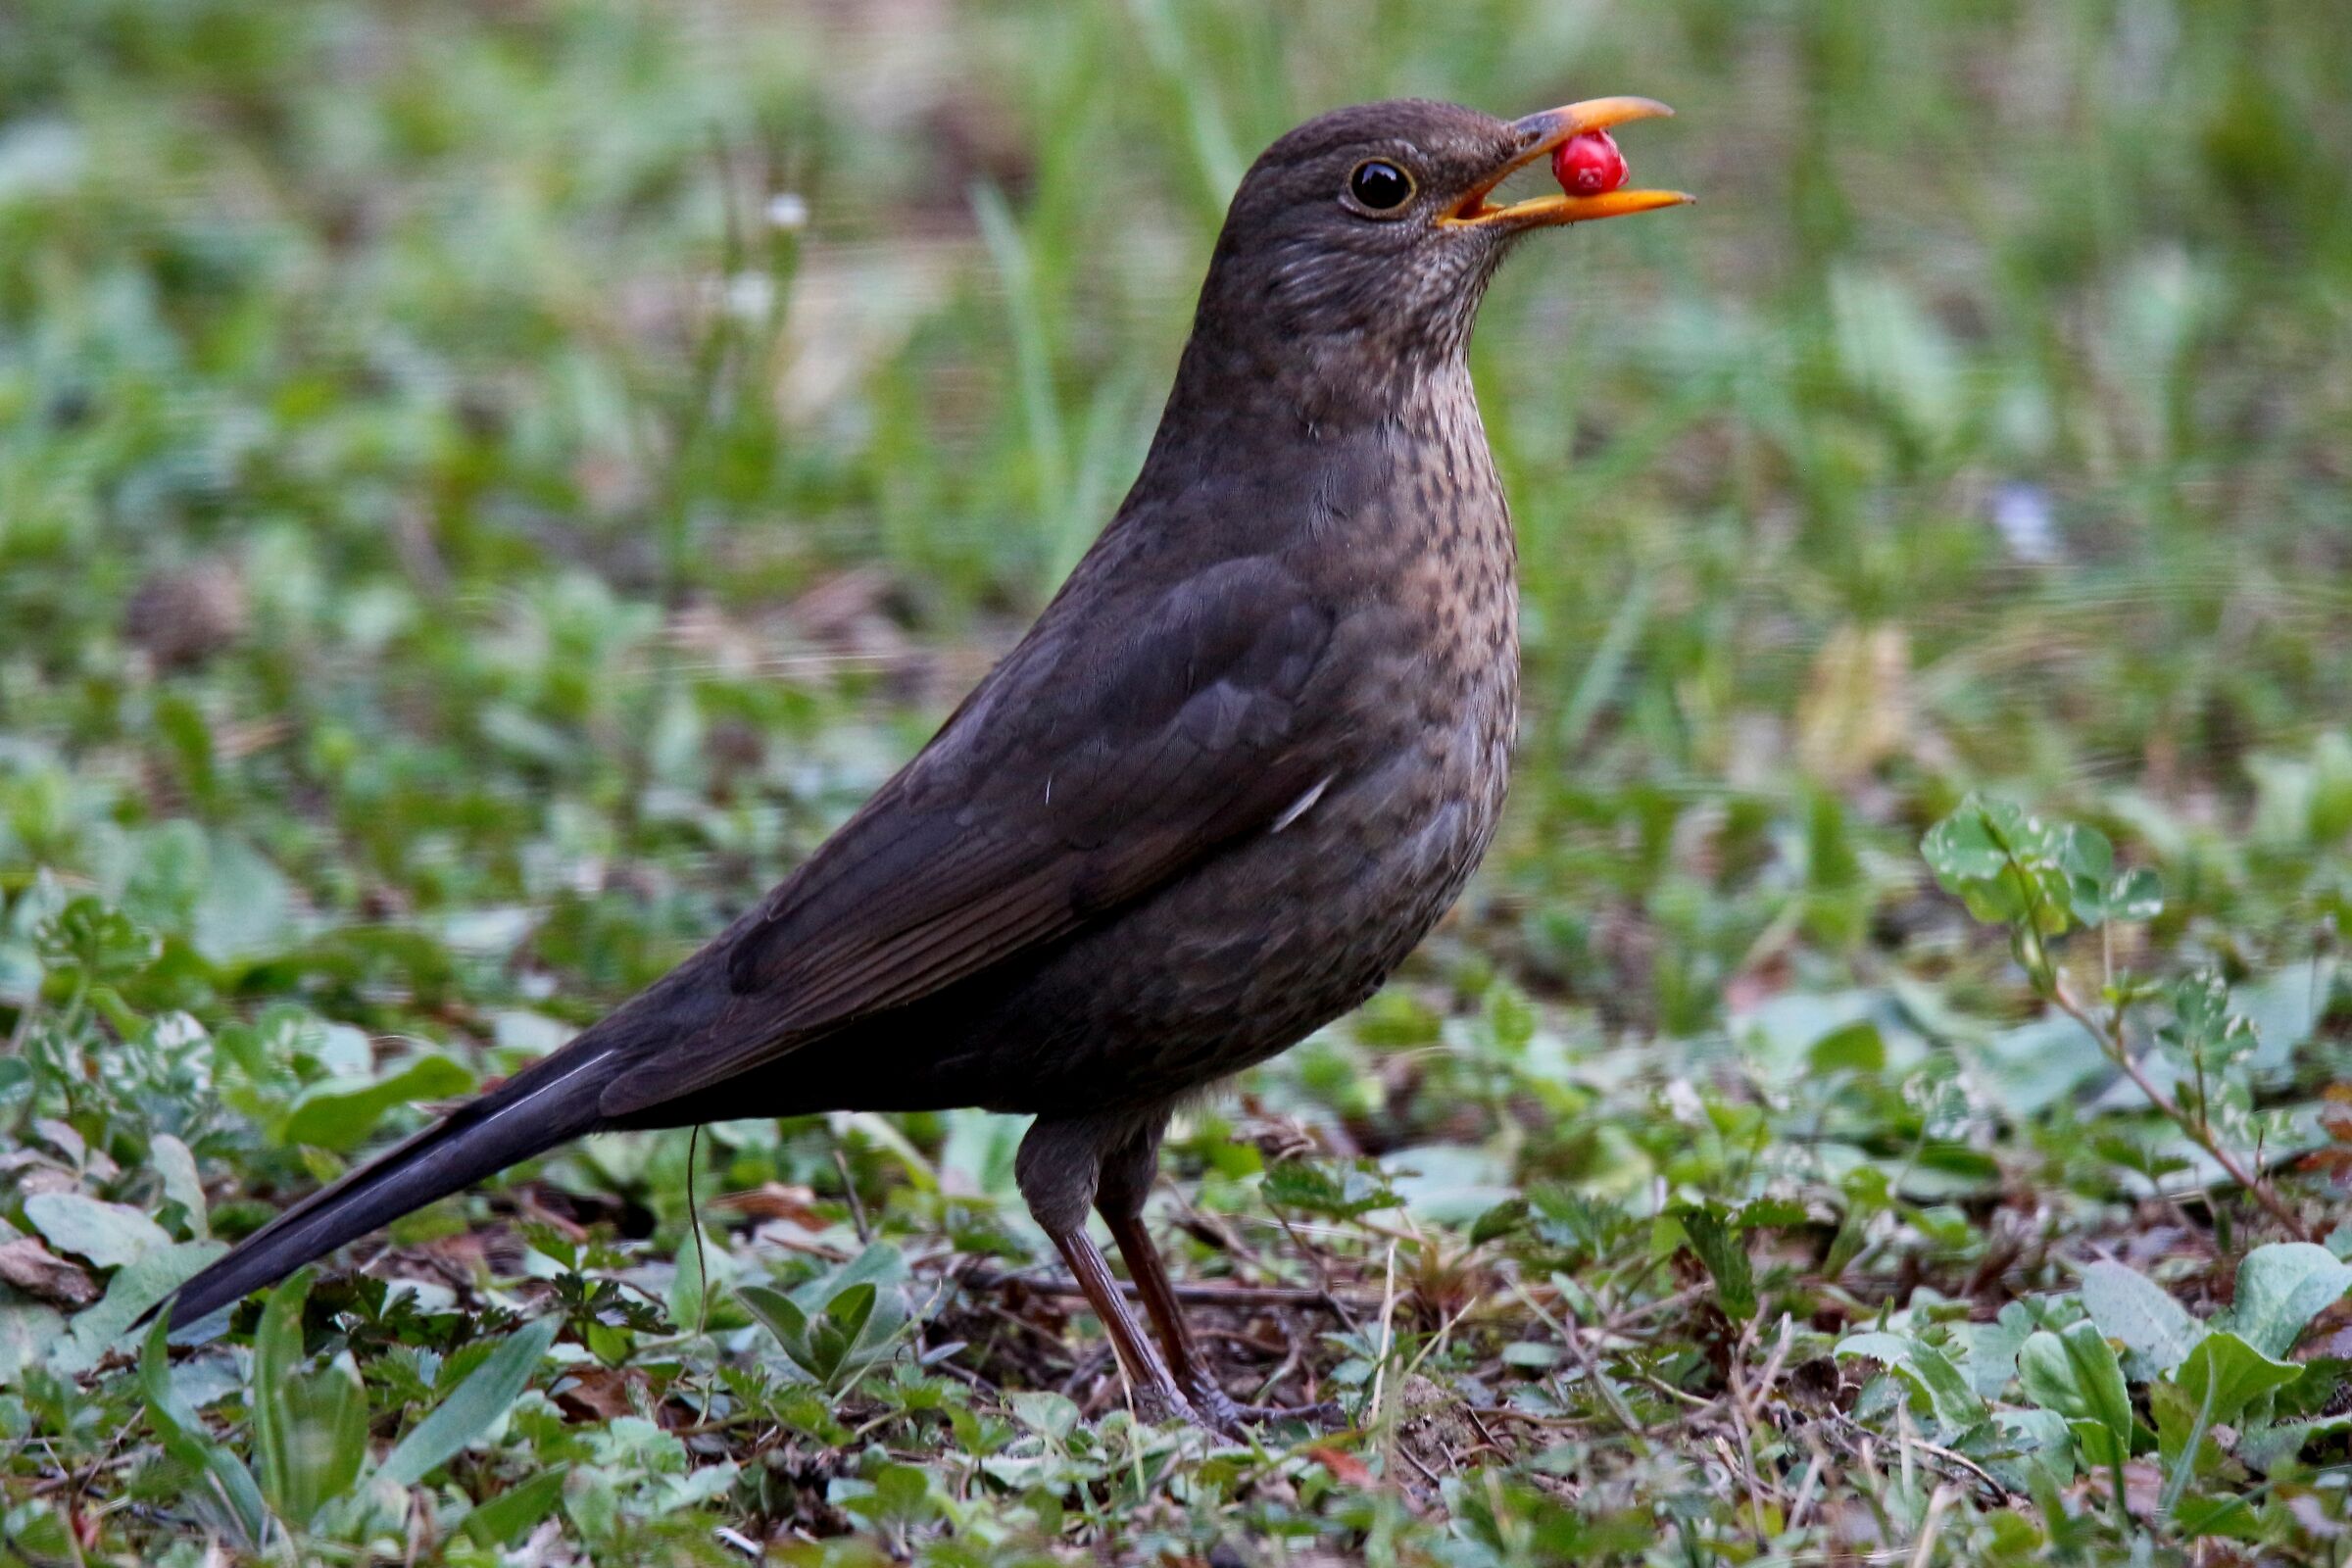 the blackbird with its berry...